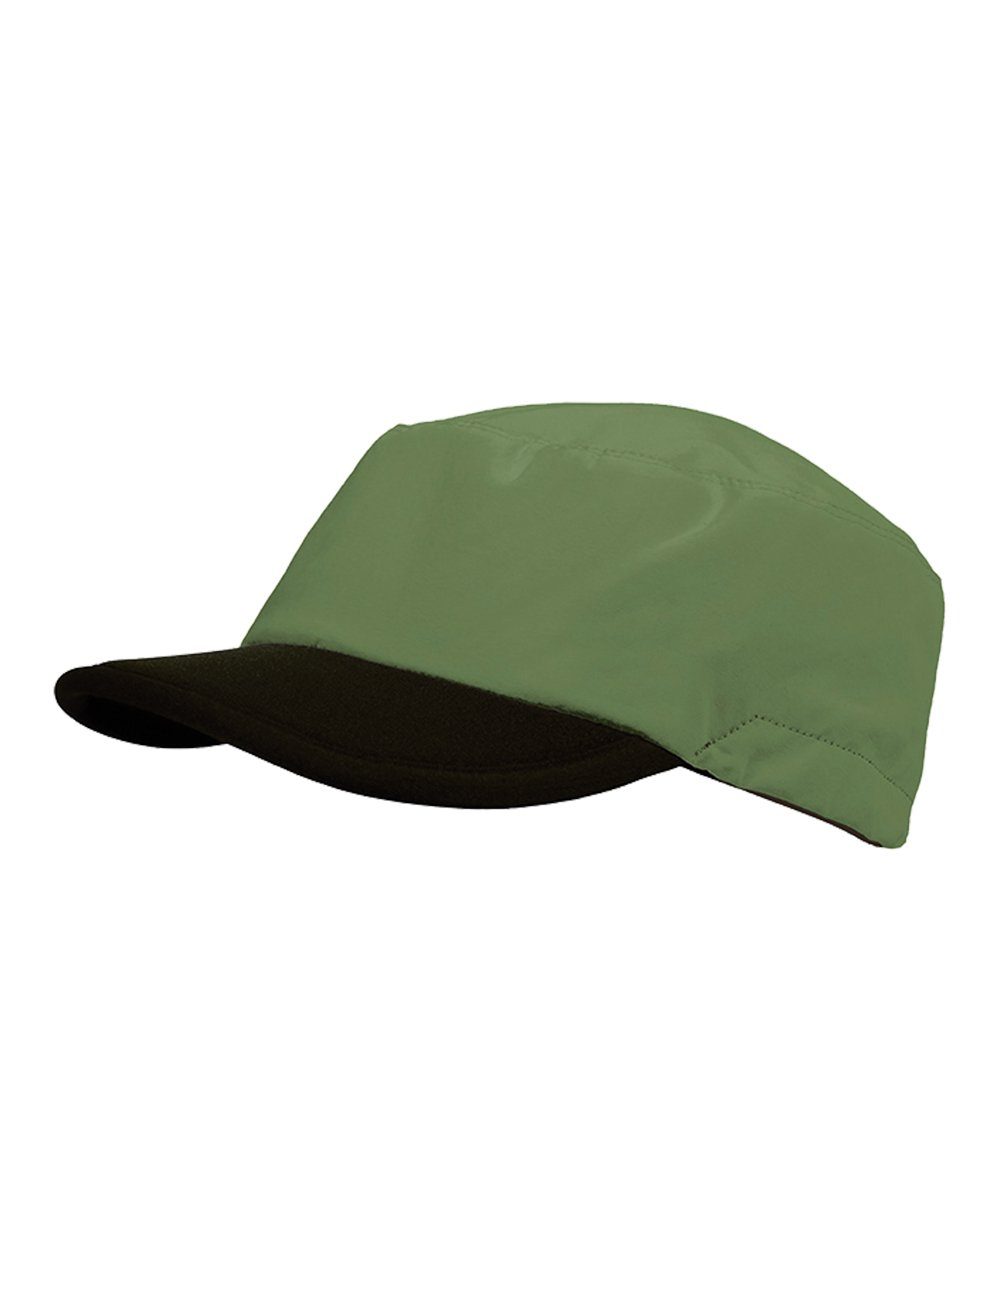 CAPO Army Cap CAPO-LIGHT CAP MILITARY Europe Made Europe in in Made spinach